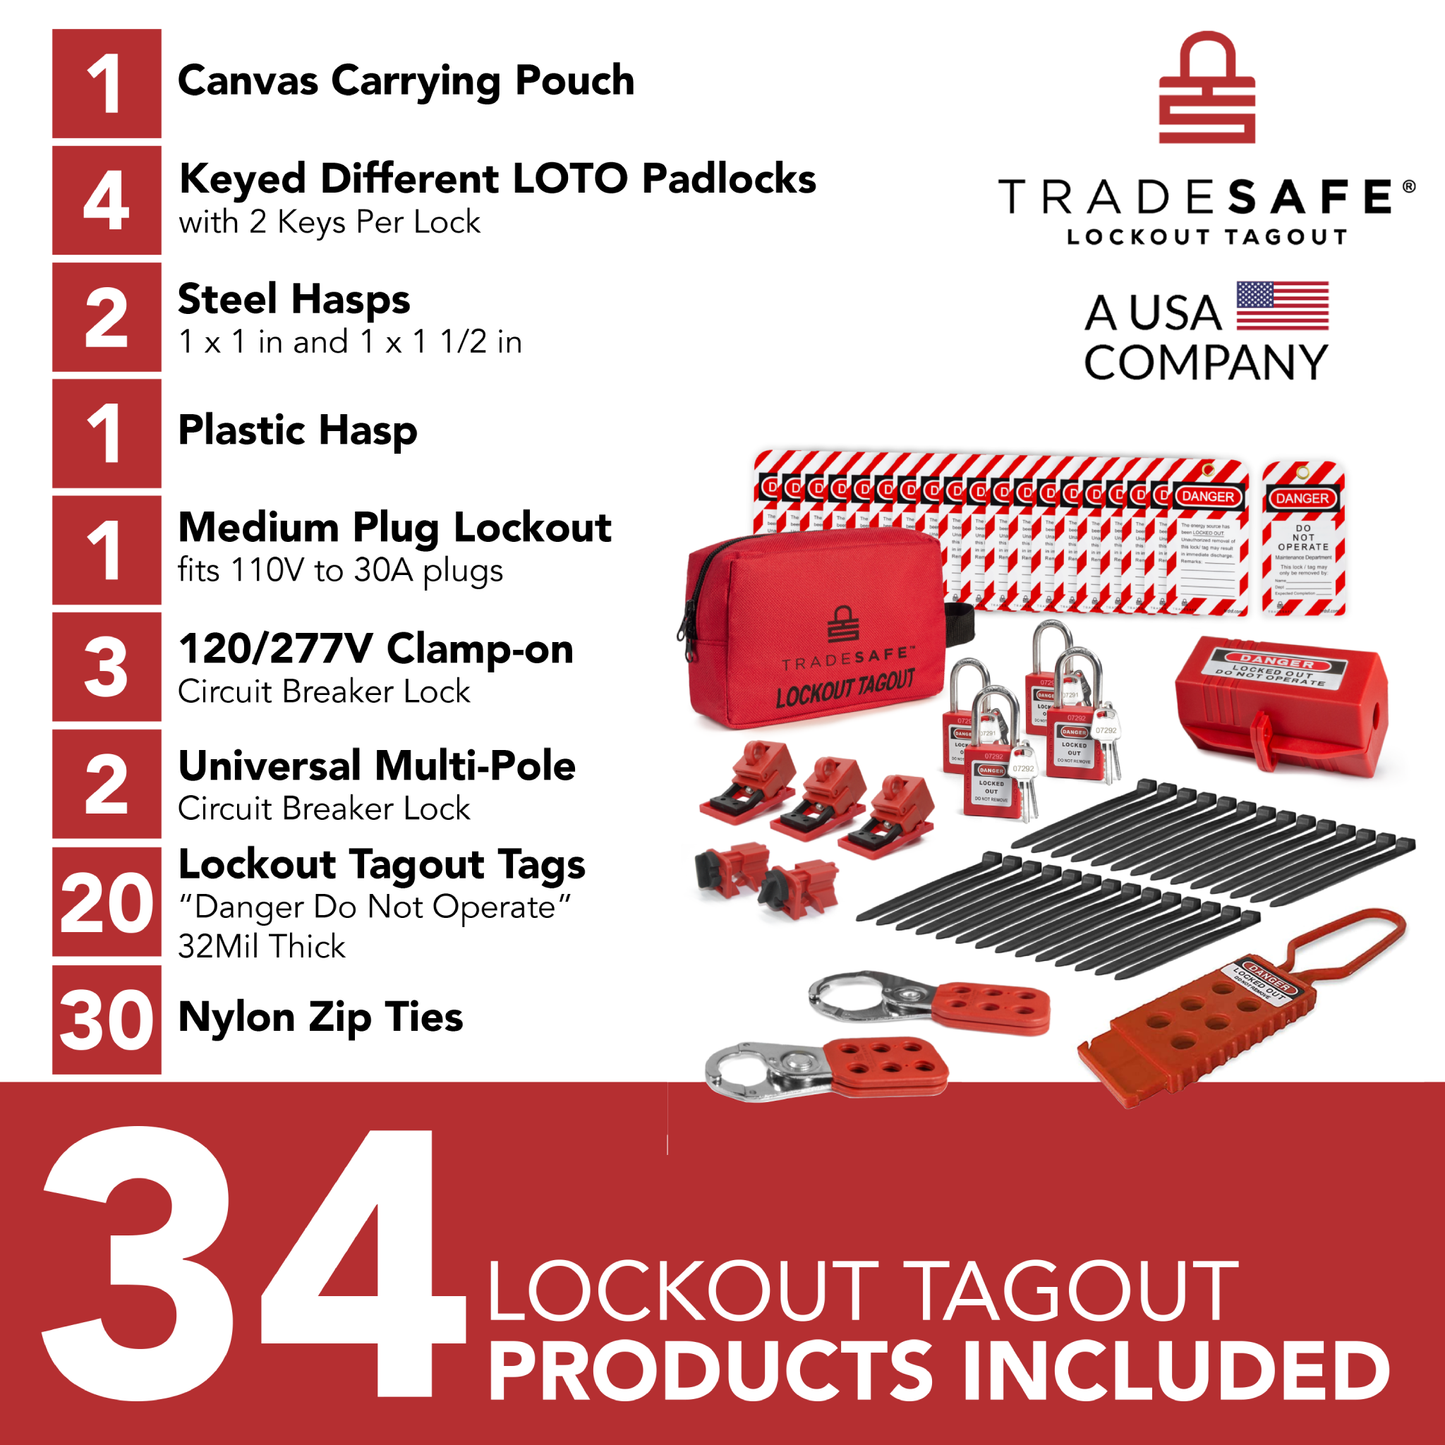 illustration of a Lockout Tagout kit with component quantities listed Edit alt text